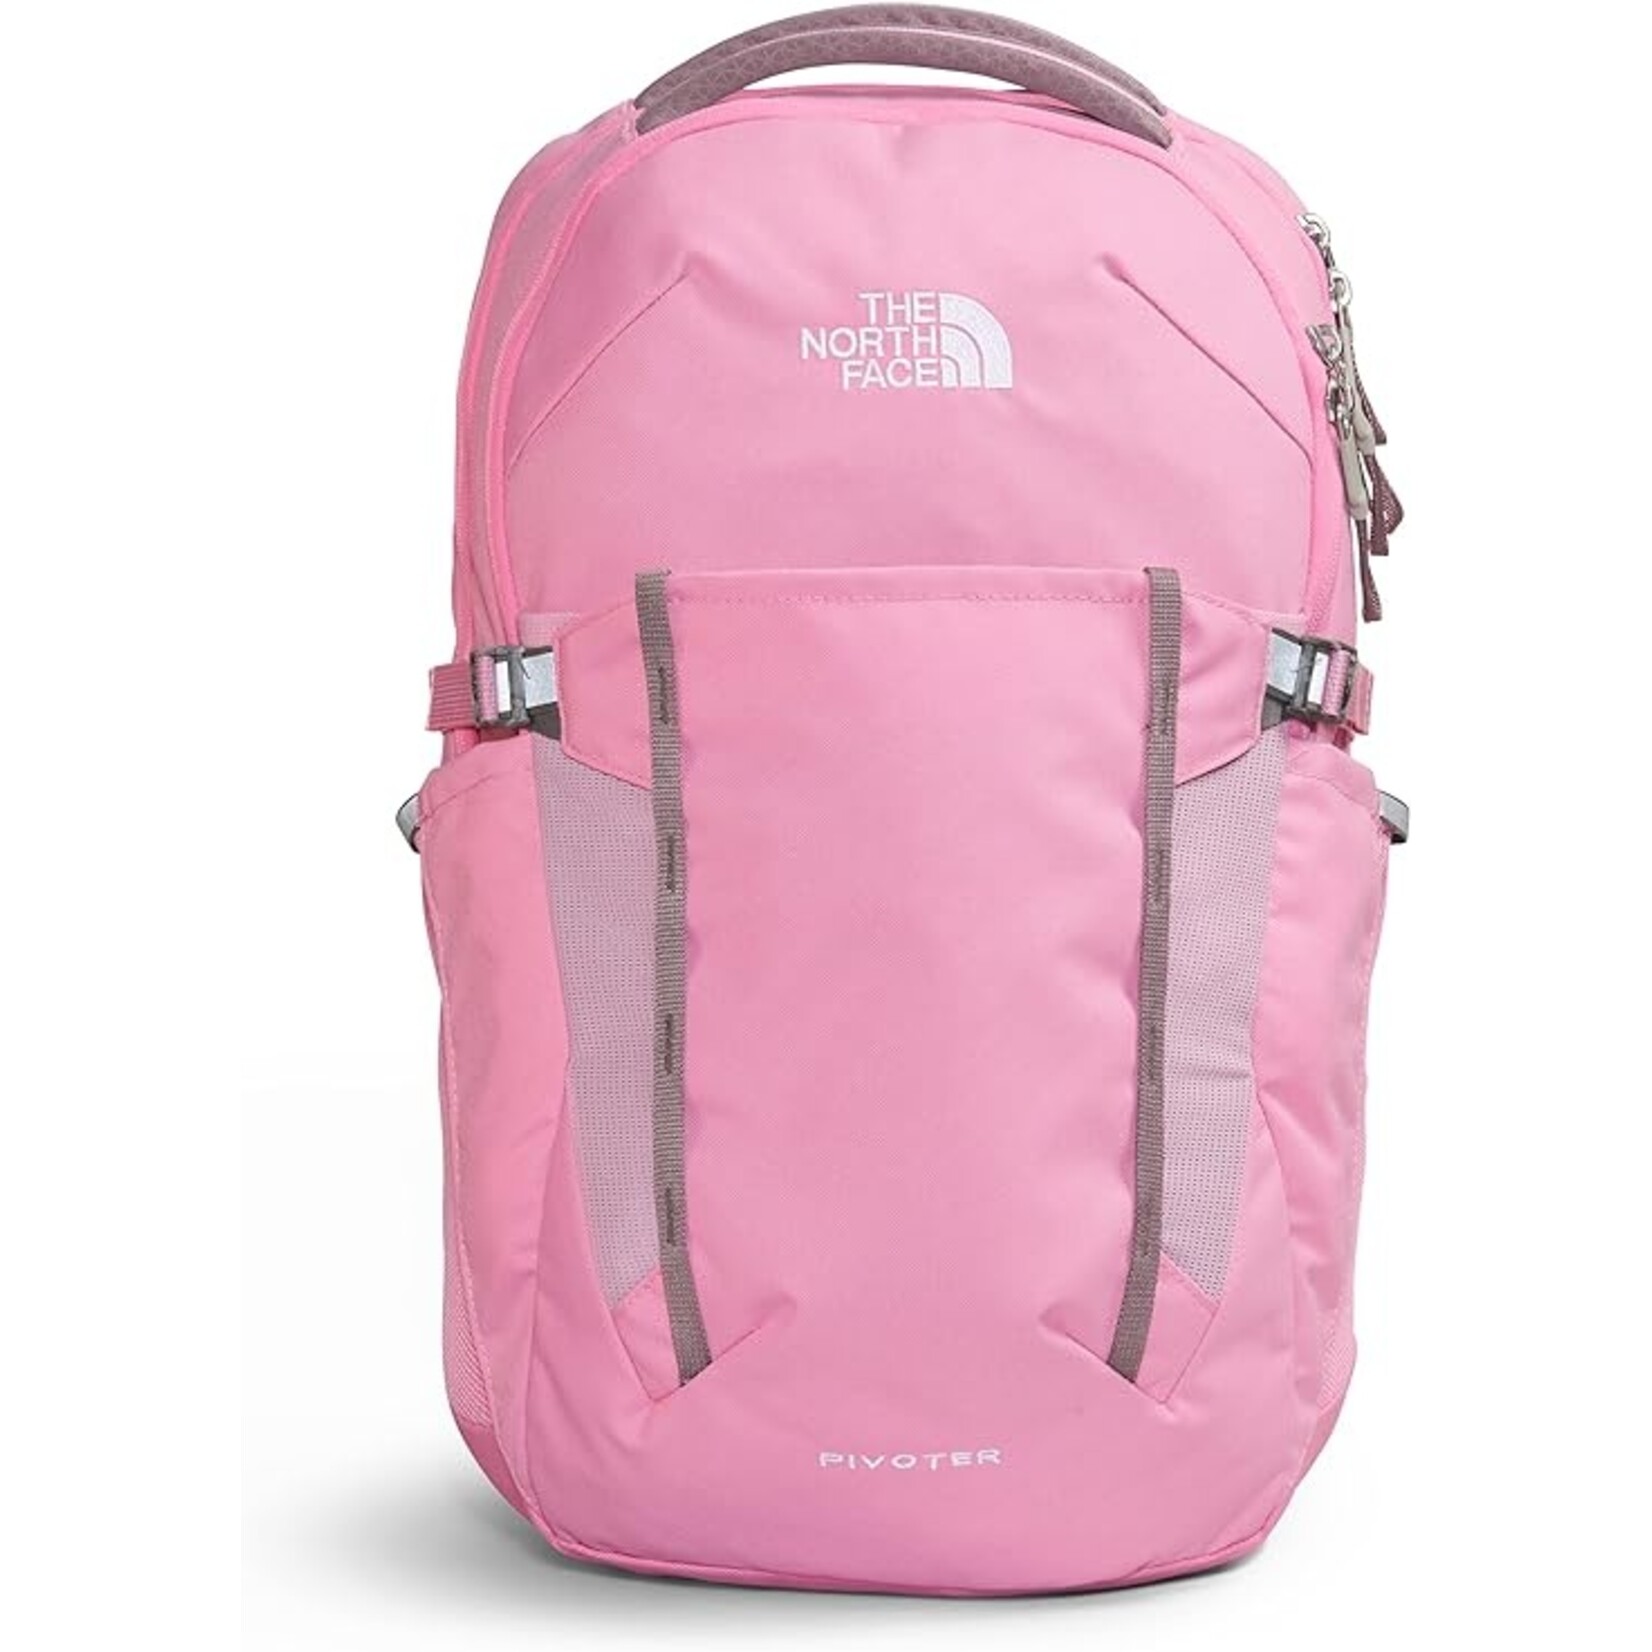 THE NORTH FACE WOMEN'S PIVOTER BACKPACK